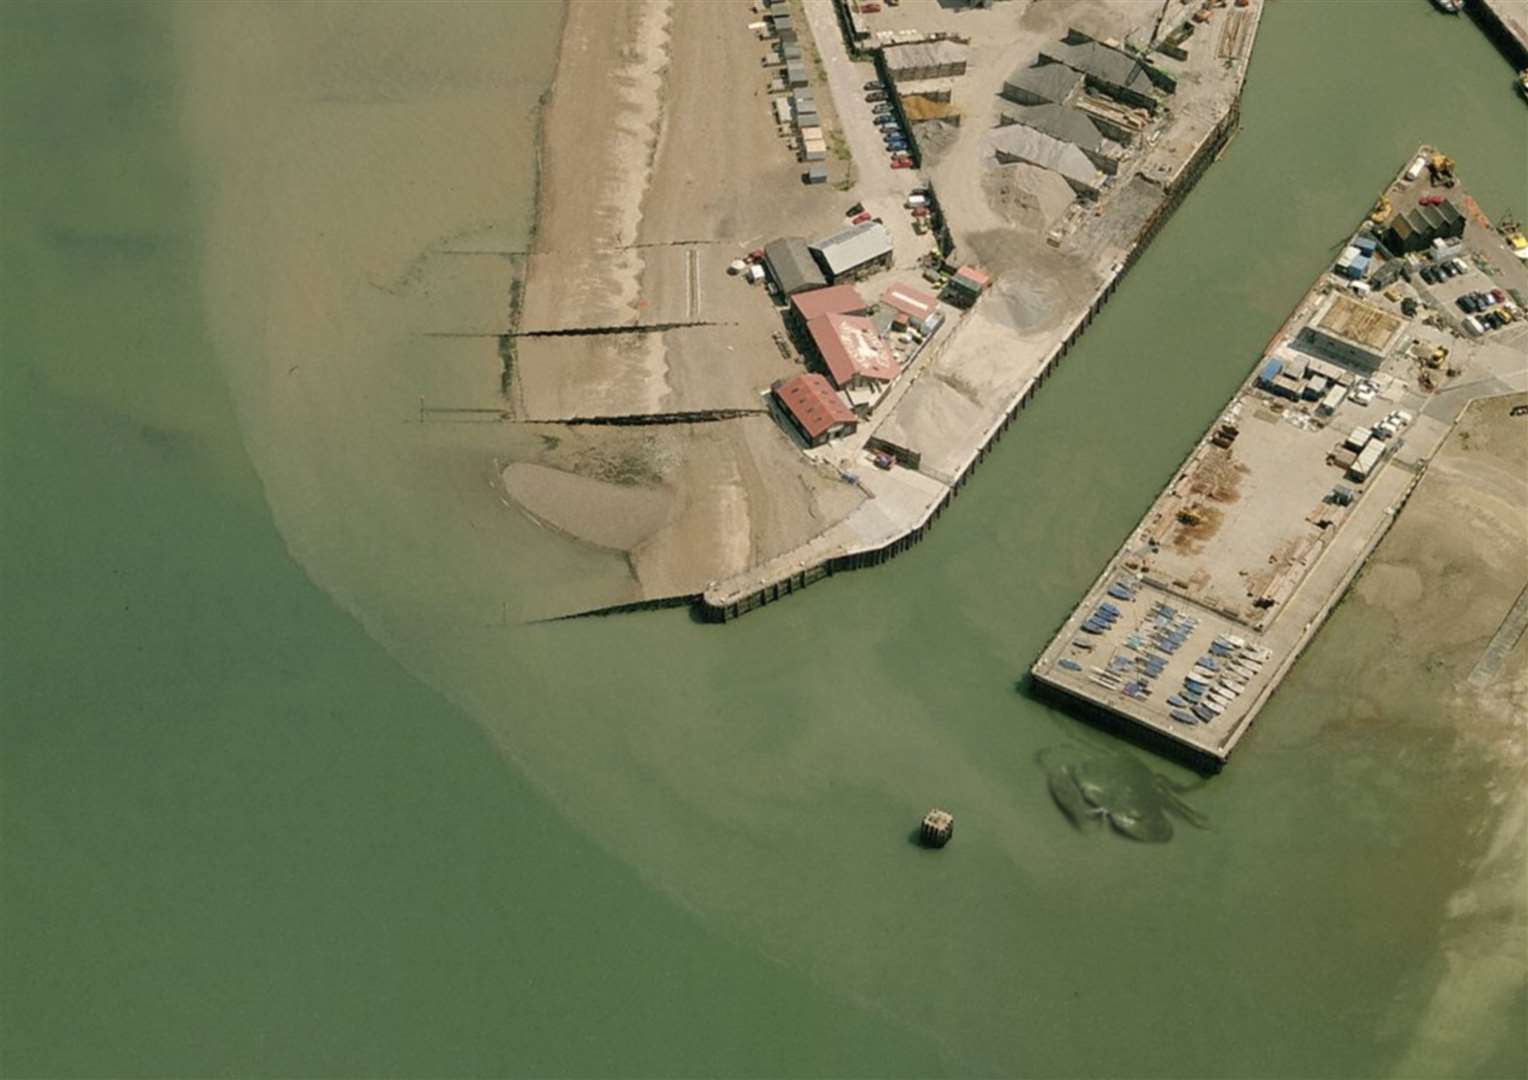 Crabzilla lurking beneath the murky water. Picture: Quinton Winter/Weird Whitstable